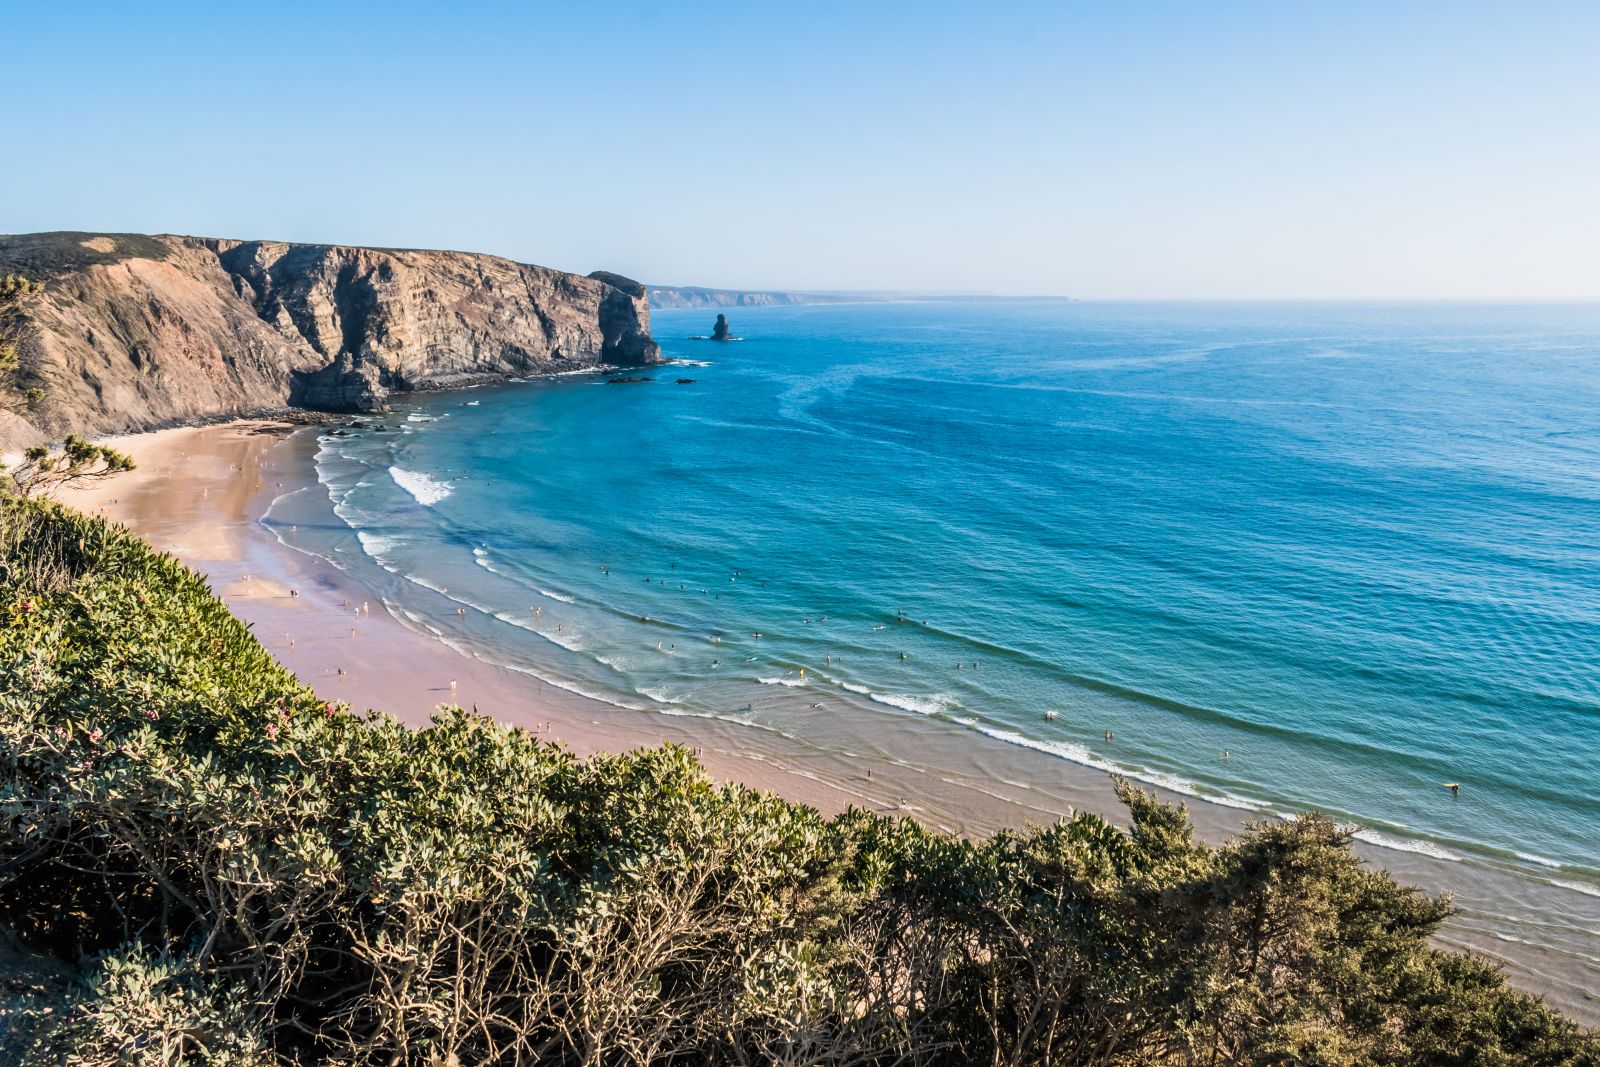 View of a beach in Alzejur, Portugal.